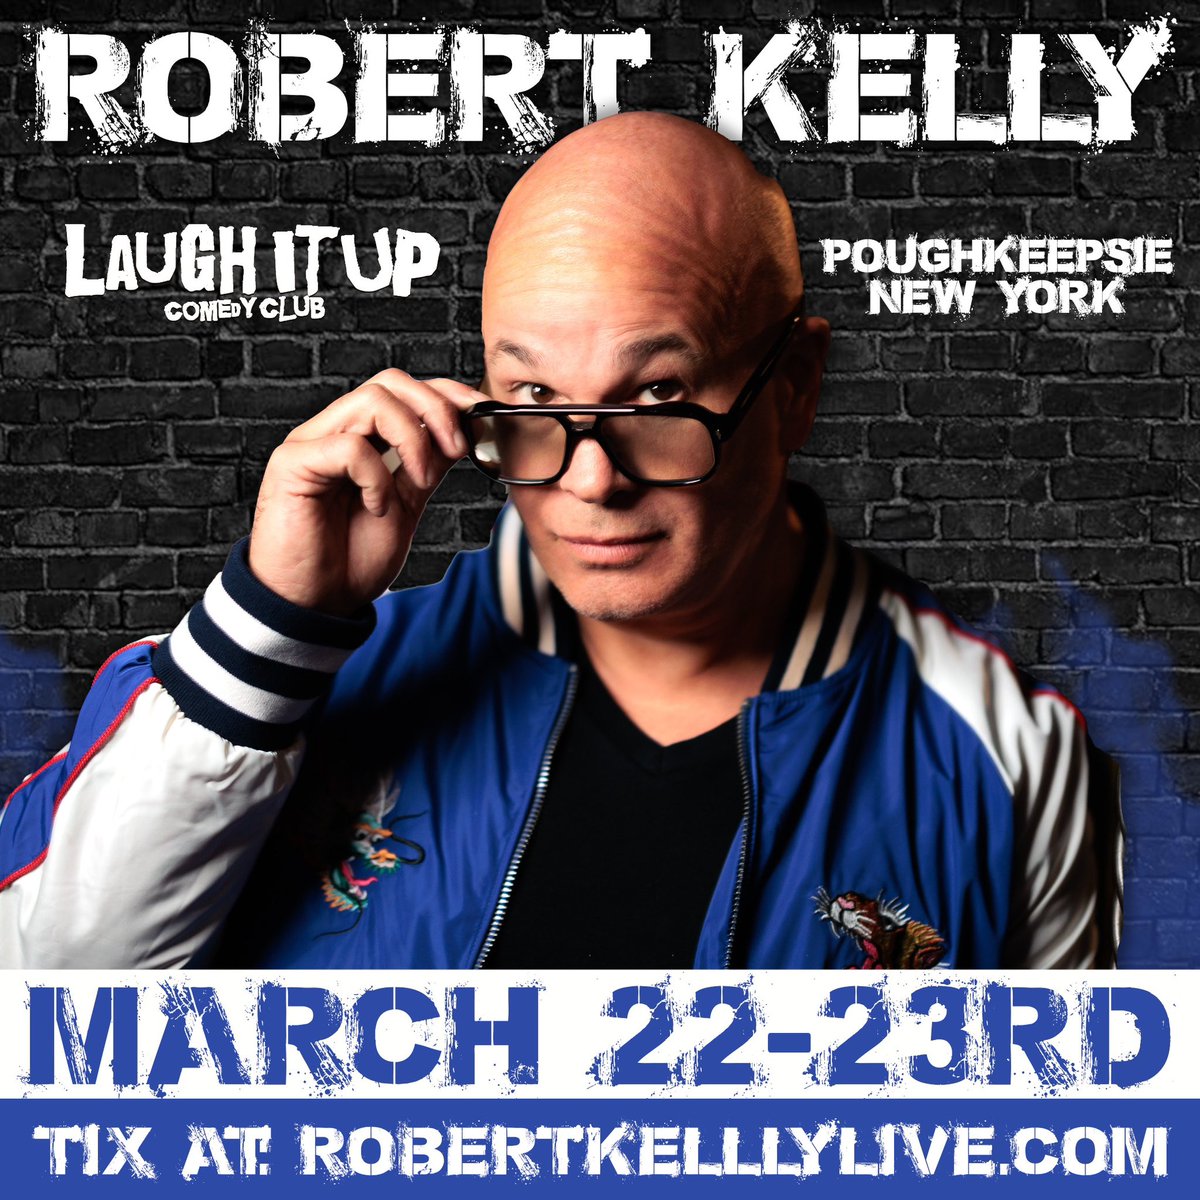 Poughkeepsie, NY! This weekend I’m headlining @Laughitupcc! Get your tickets now! #comedy #standup #poughkeepsie